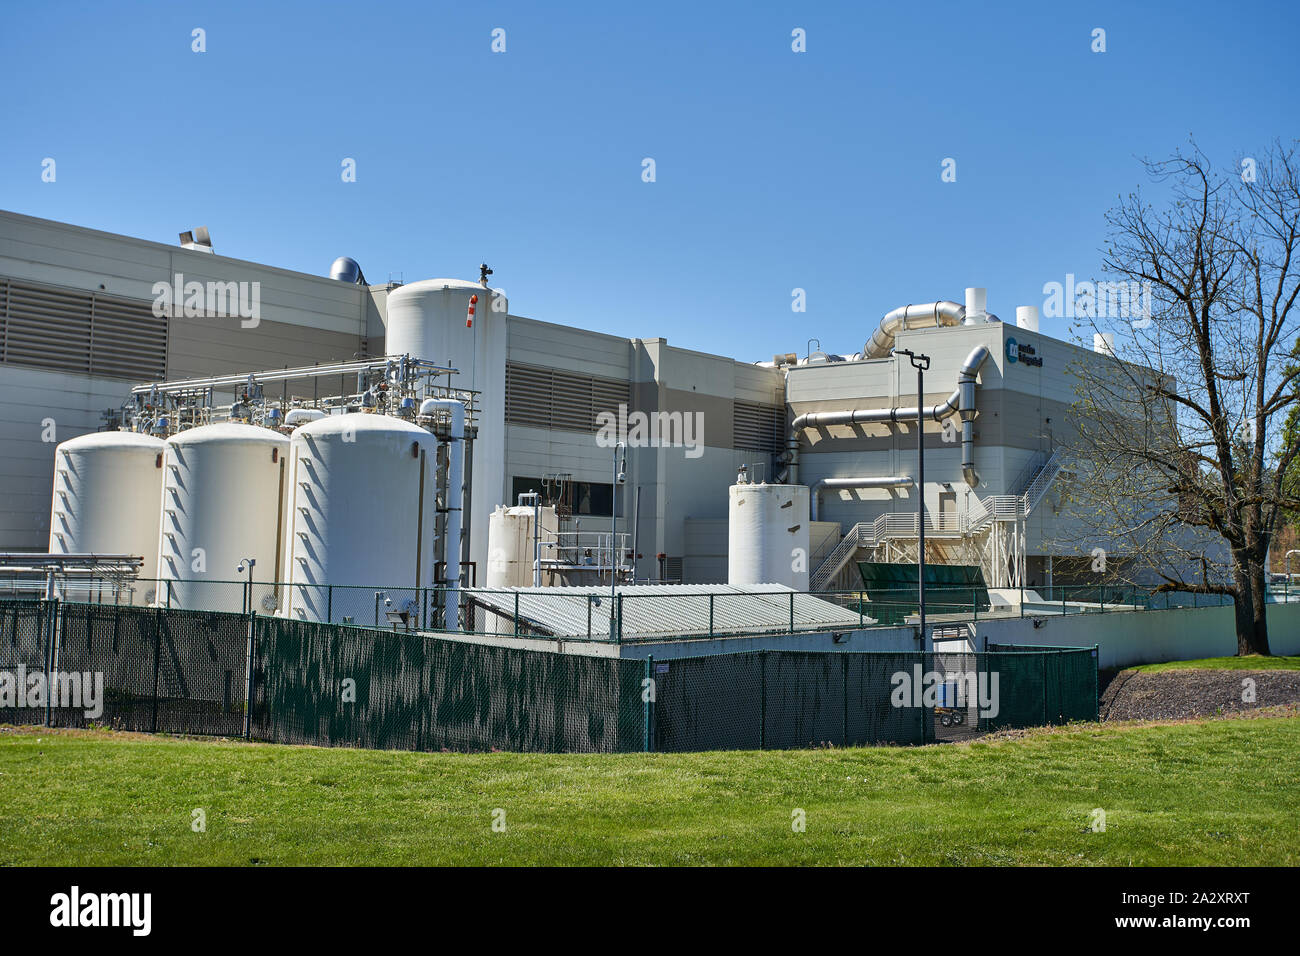 American integrated circuits manufacturer Maxim Integrated's Beaverton facility in Oregon, seen on Apr 30, 2019. Stock Photo